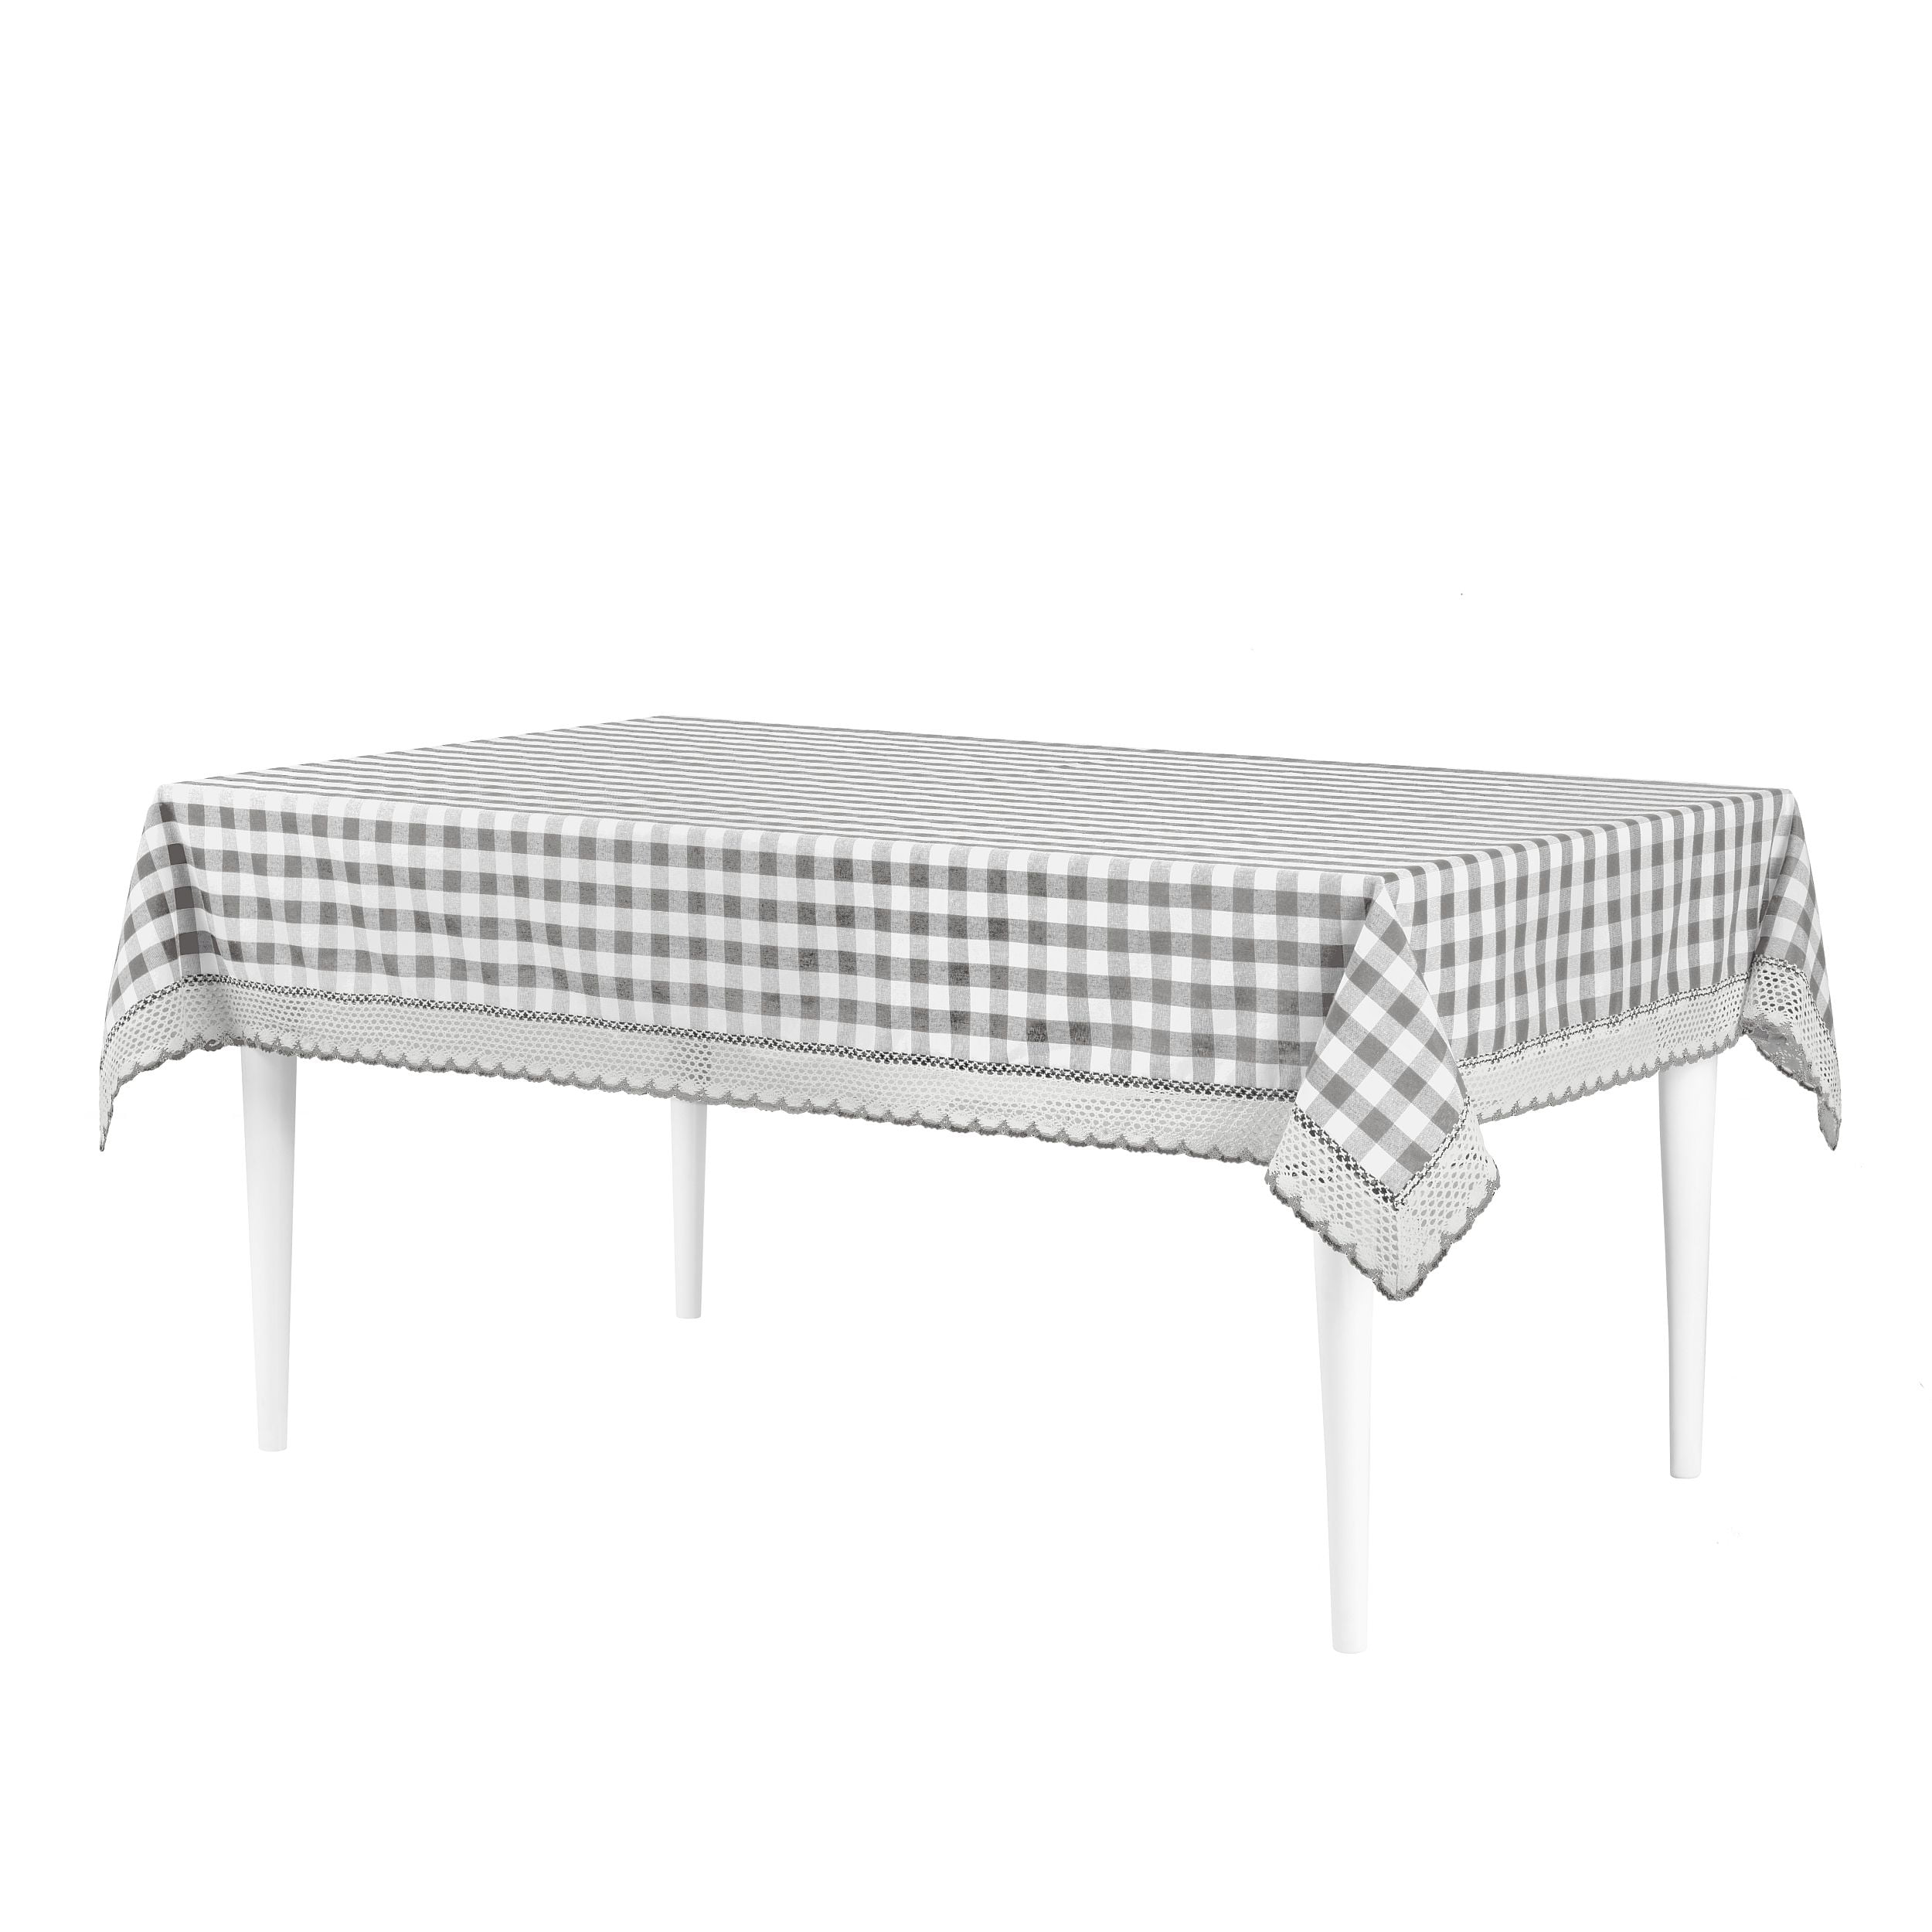 Picture of Achim BCT104GY24 60 x 104 in. Buffalo Check Tablecloth with Macram Trim Grey